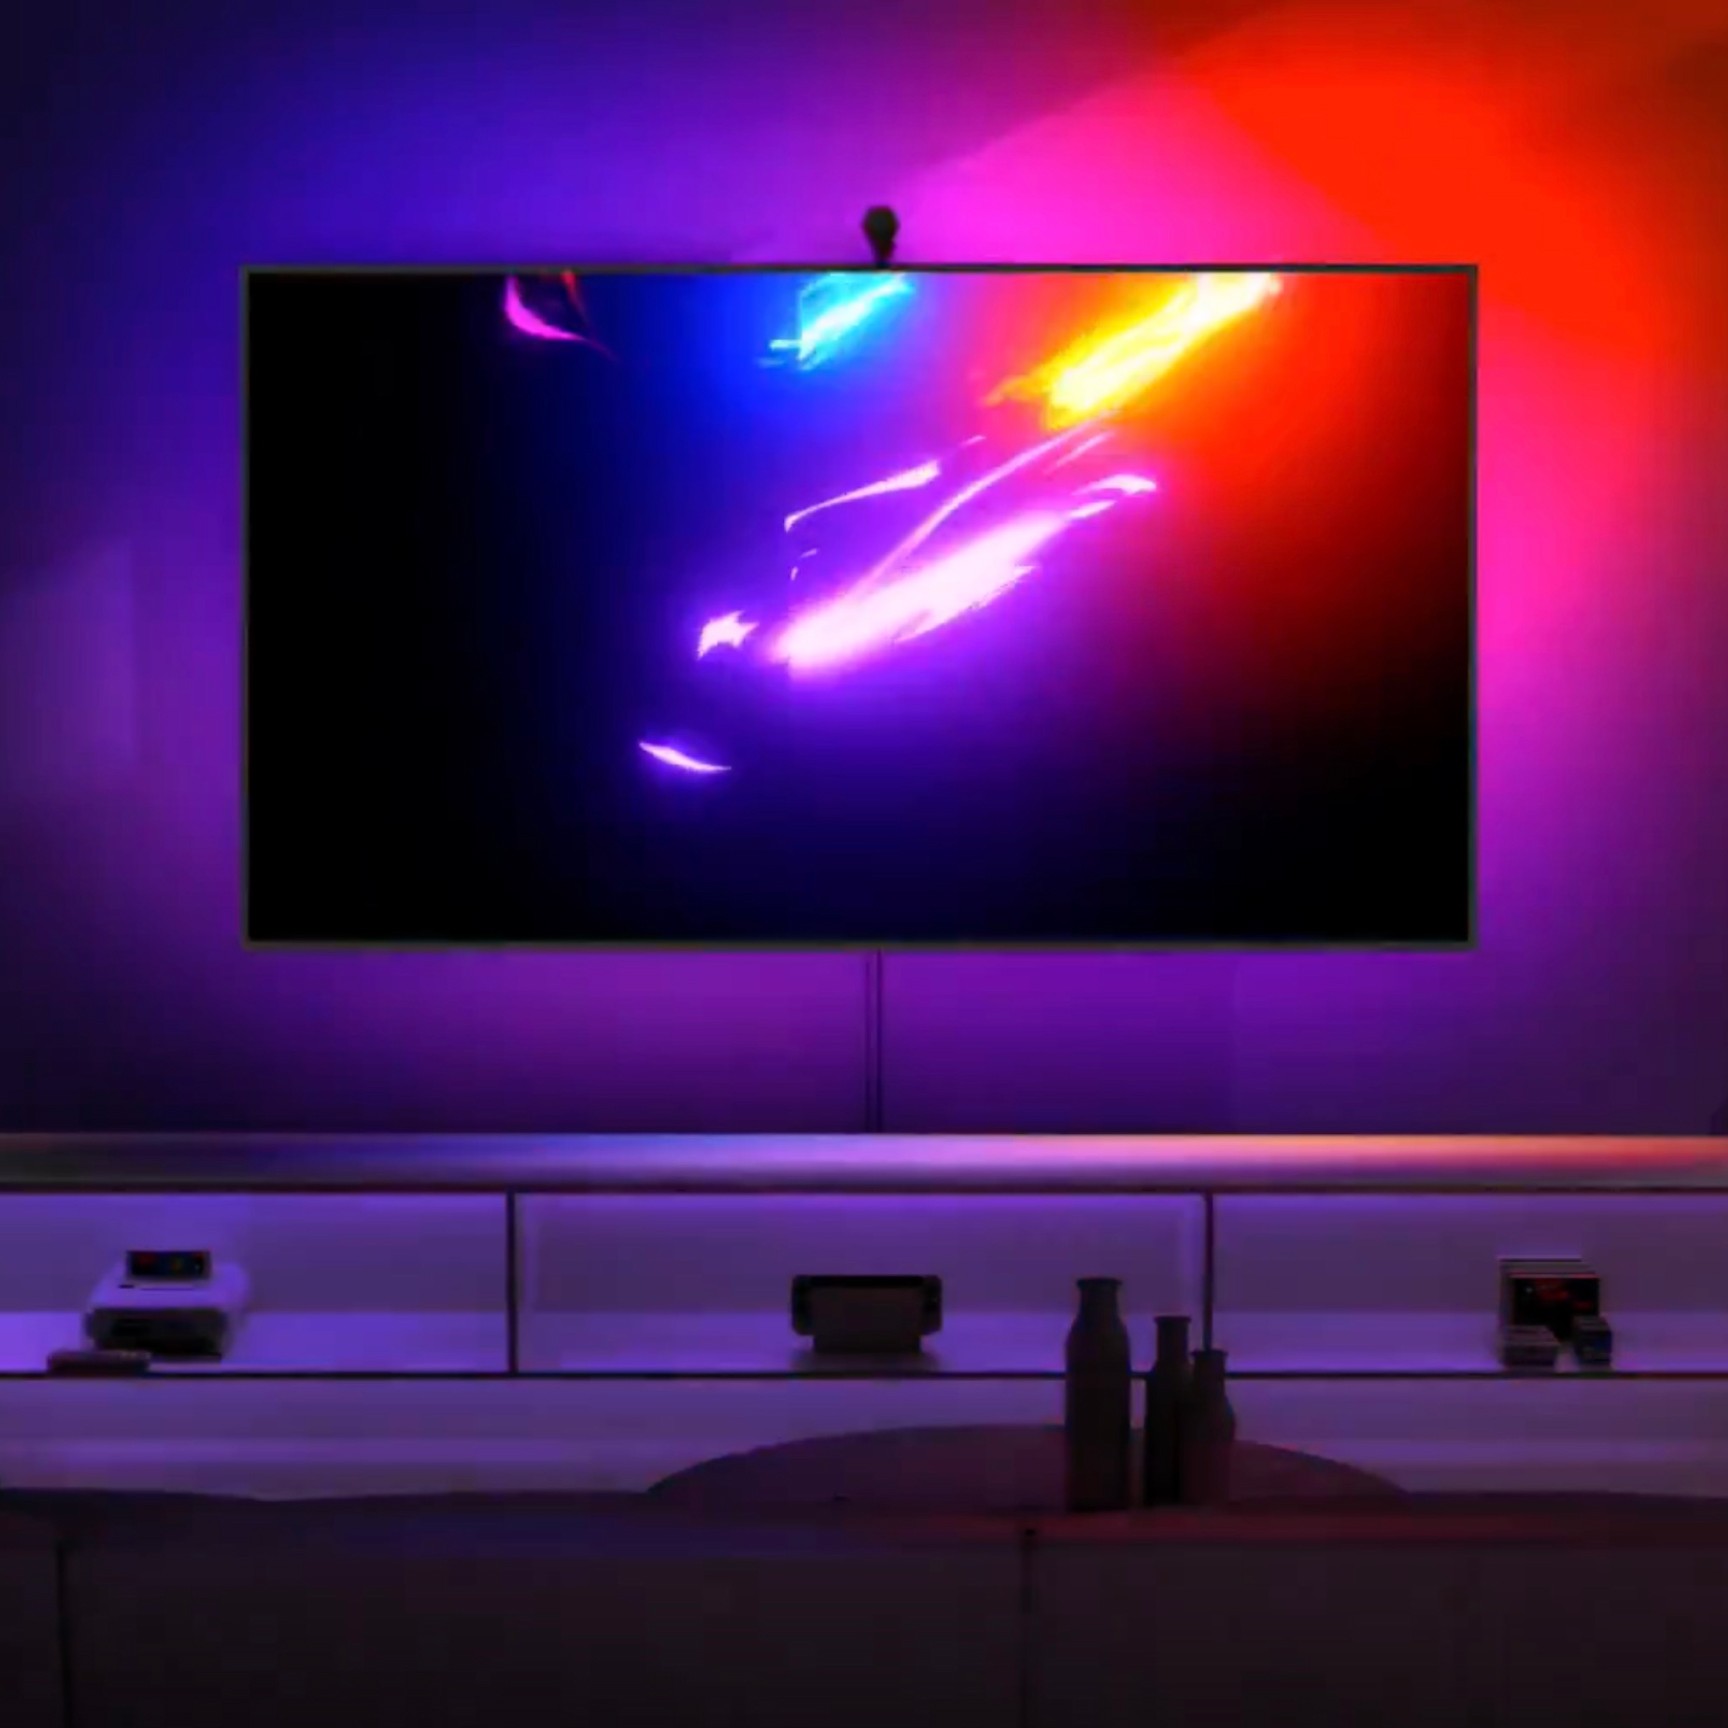 Black Friday Govee: super offer on Ambilight-style LEDs for TV